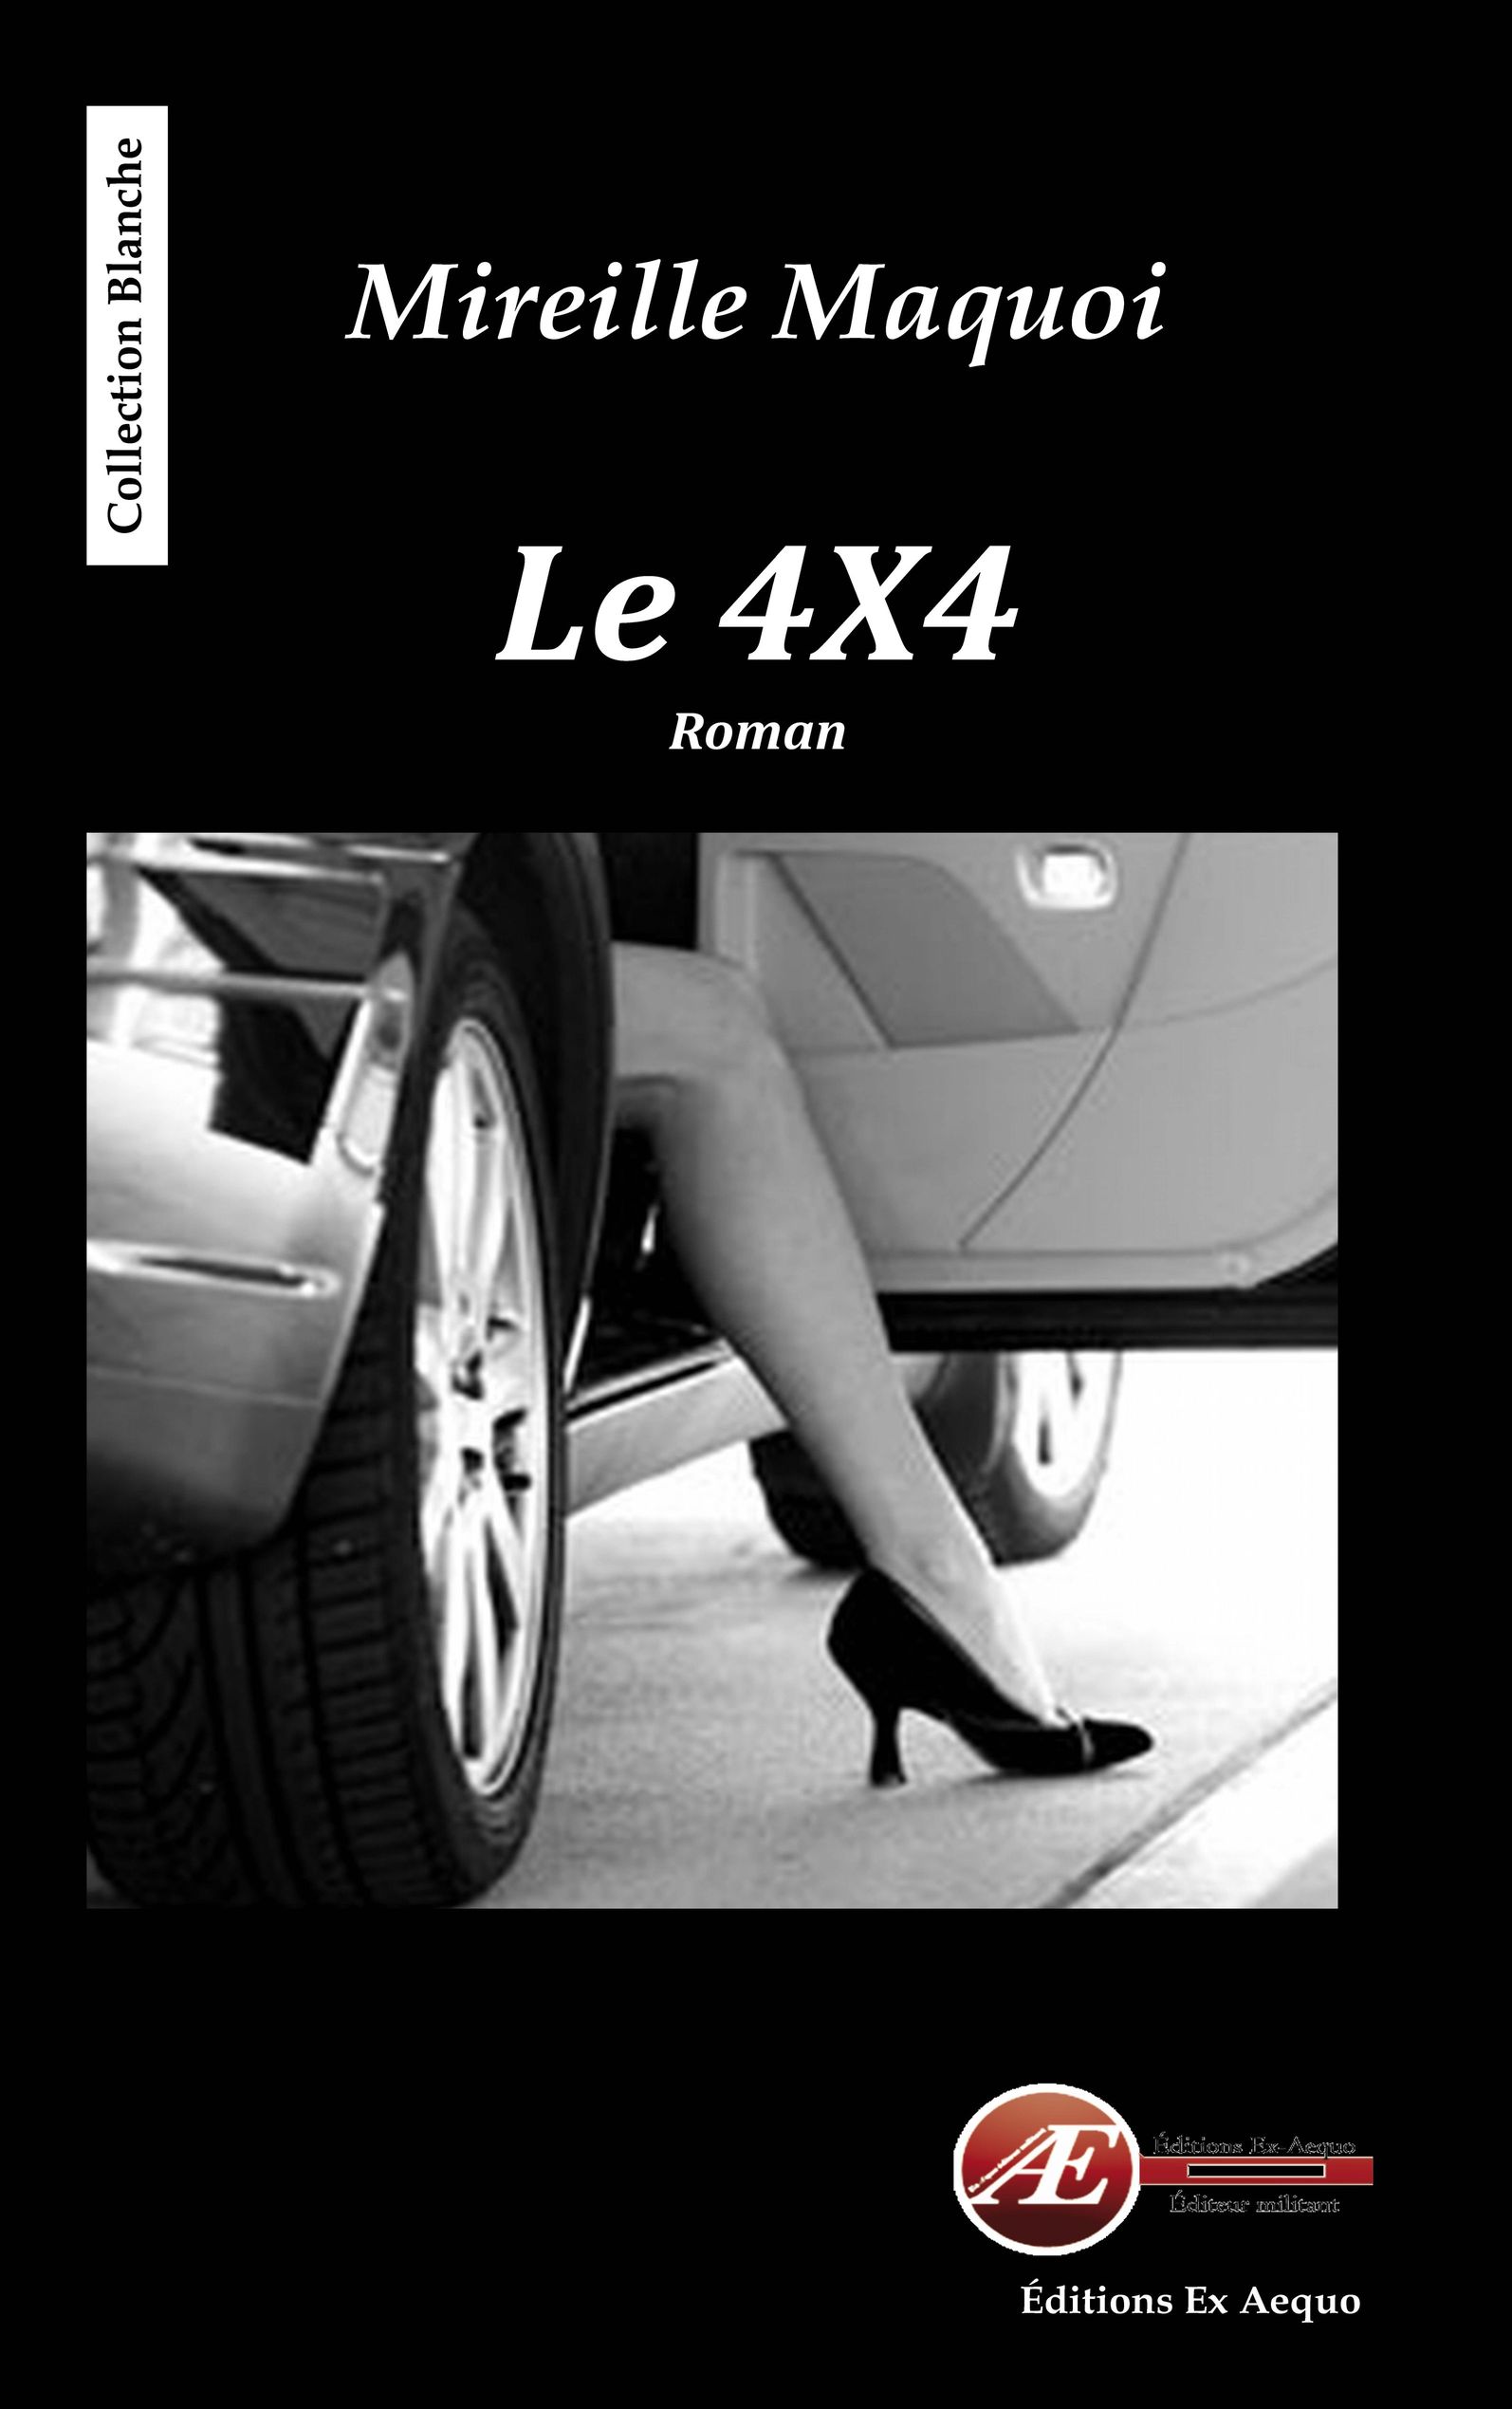 You are currently viewing Le 4X4, de Mireille Maquoi